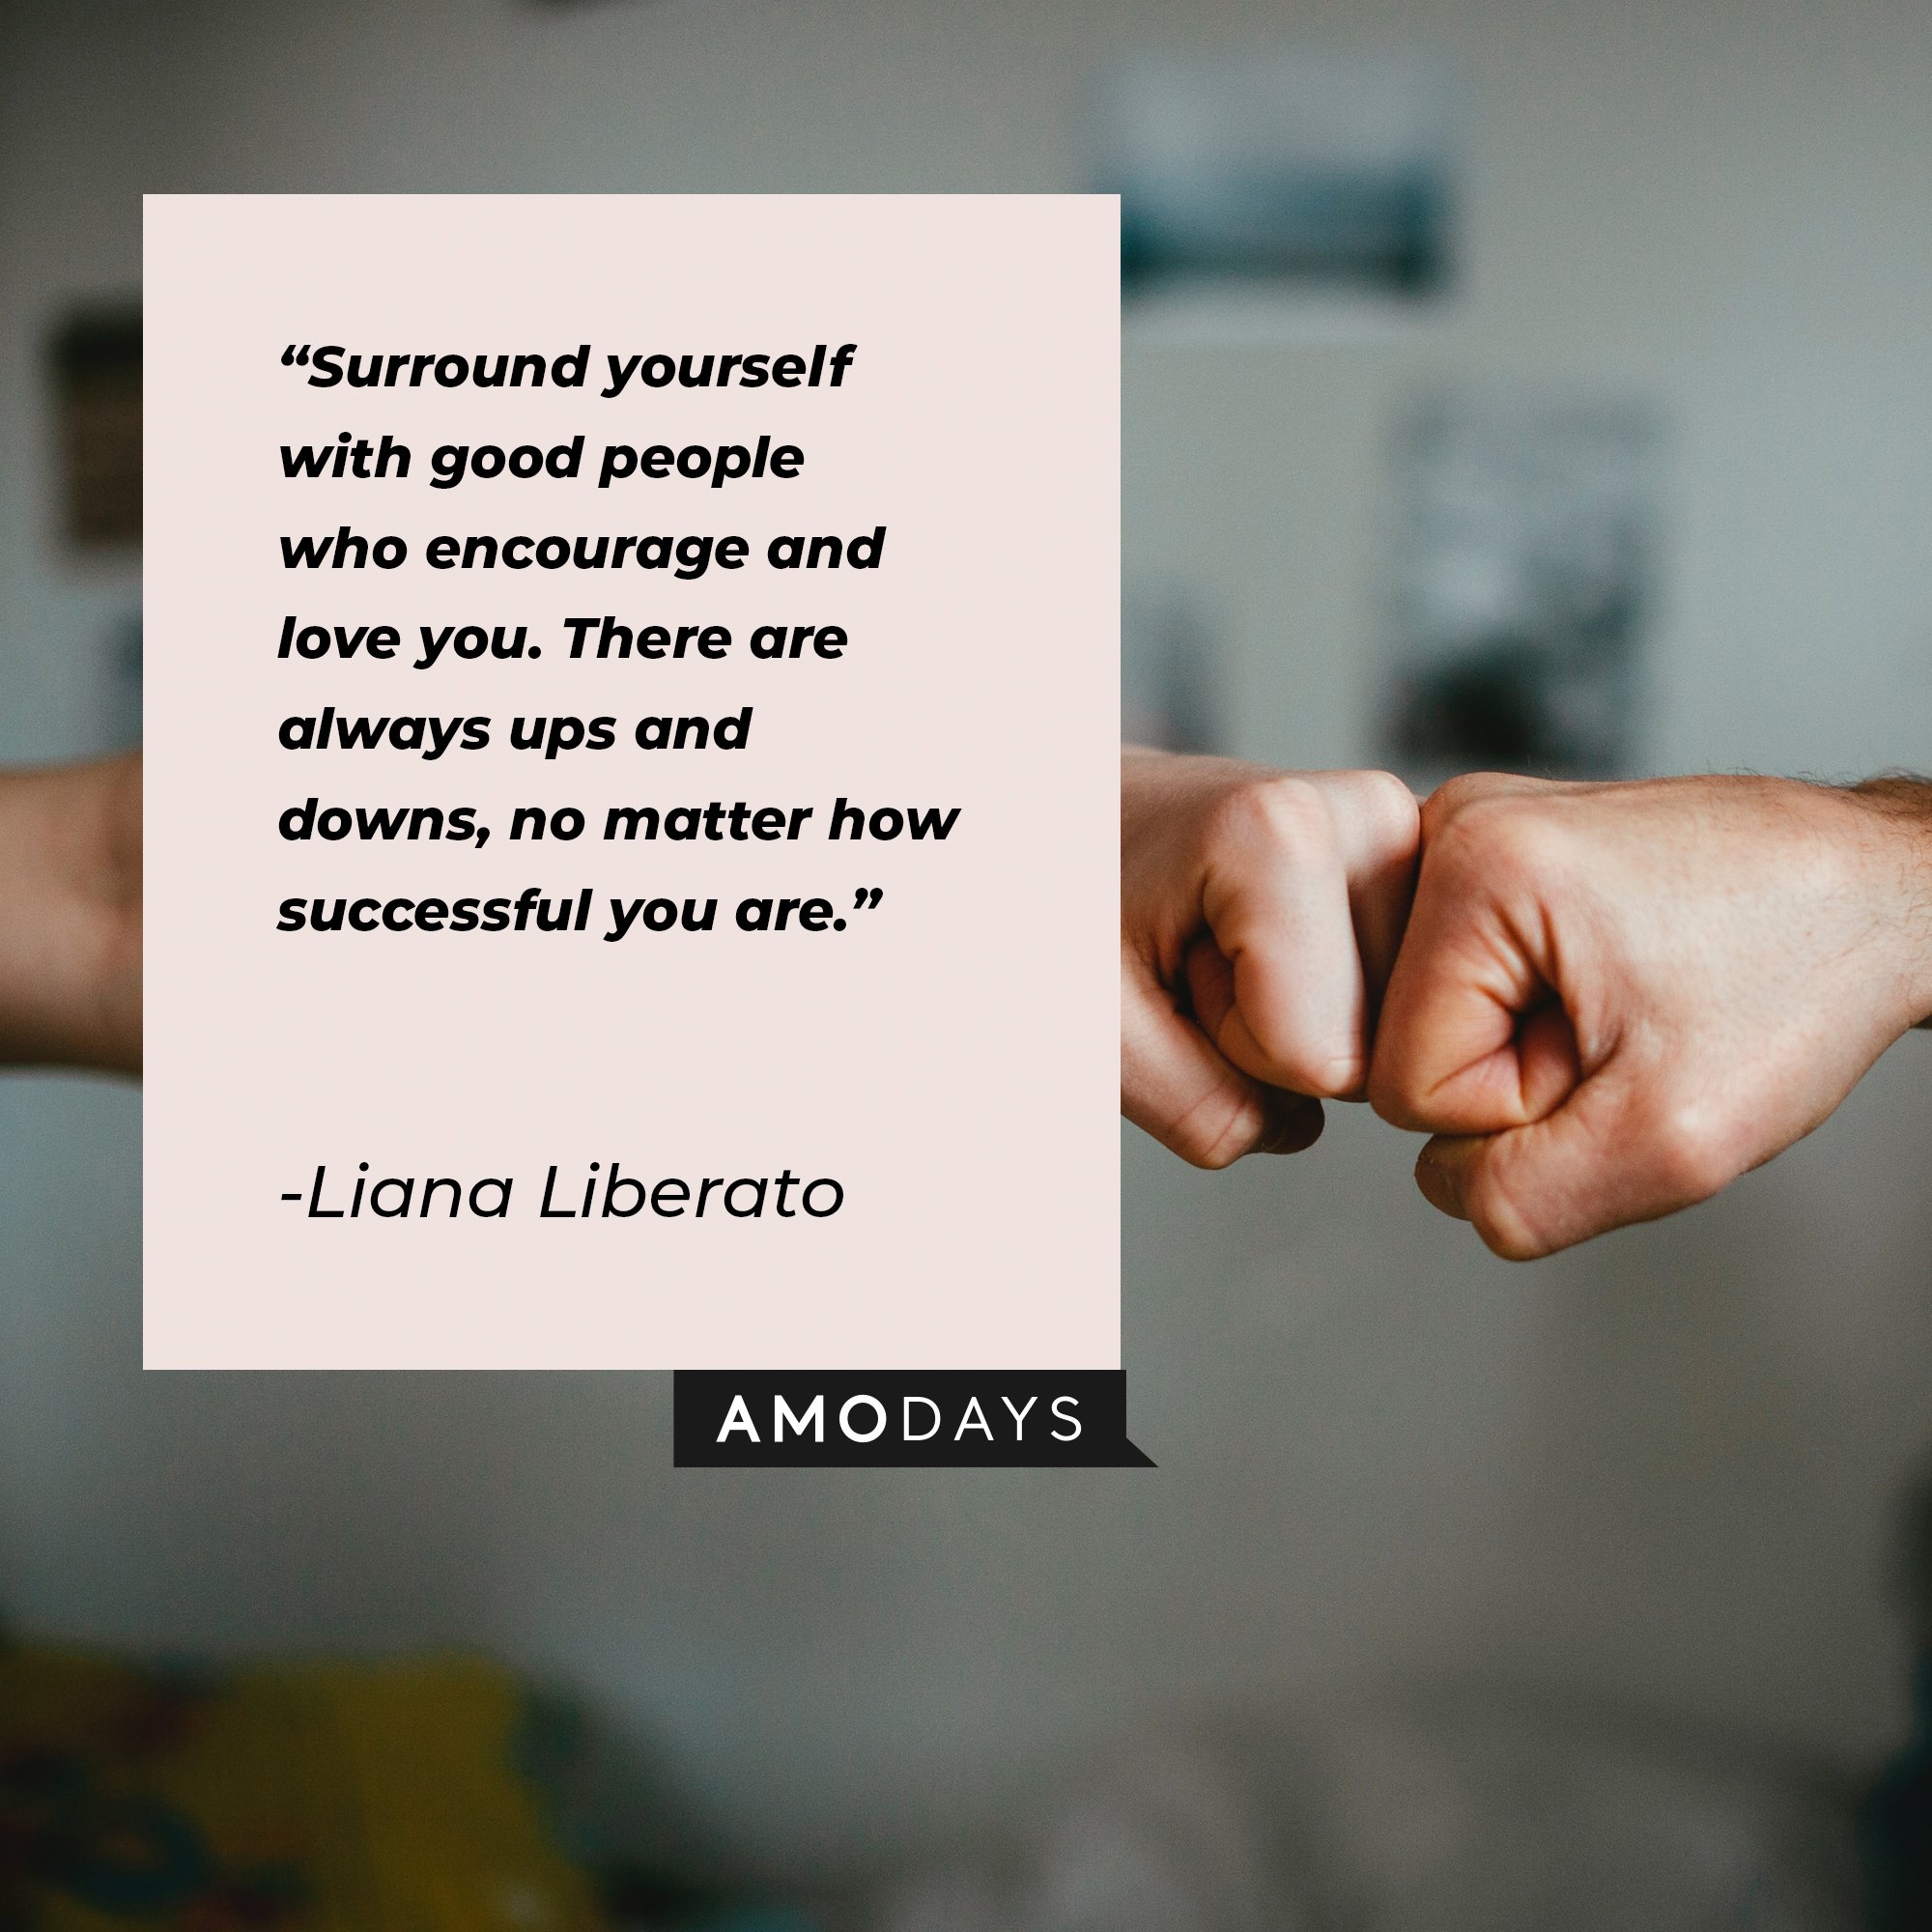 Liana Liberato’s quote: “Surround yourself with good people who encourage and love you. There are always ups and downs, no matter how successful you are.” | Image: AmoDays